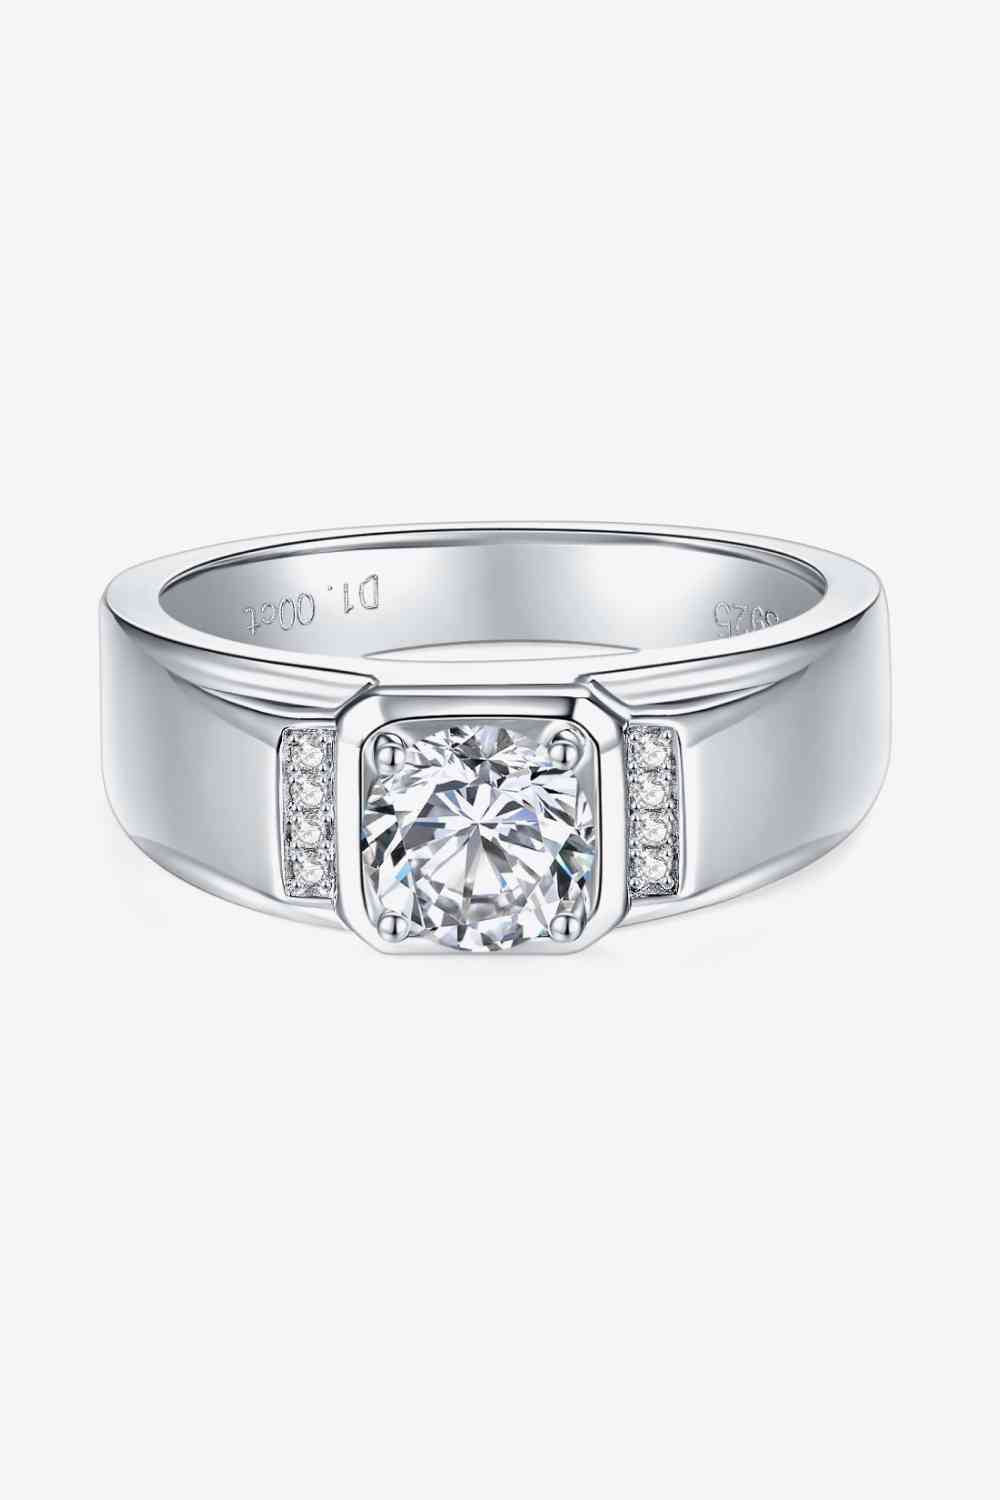 From The Heart 1 Carat Moissanite Ring - lolaluxeshop